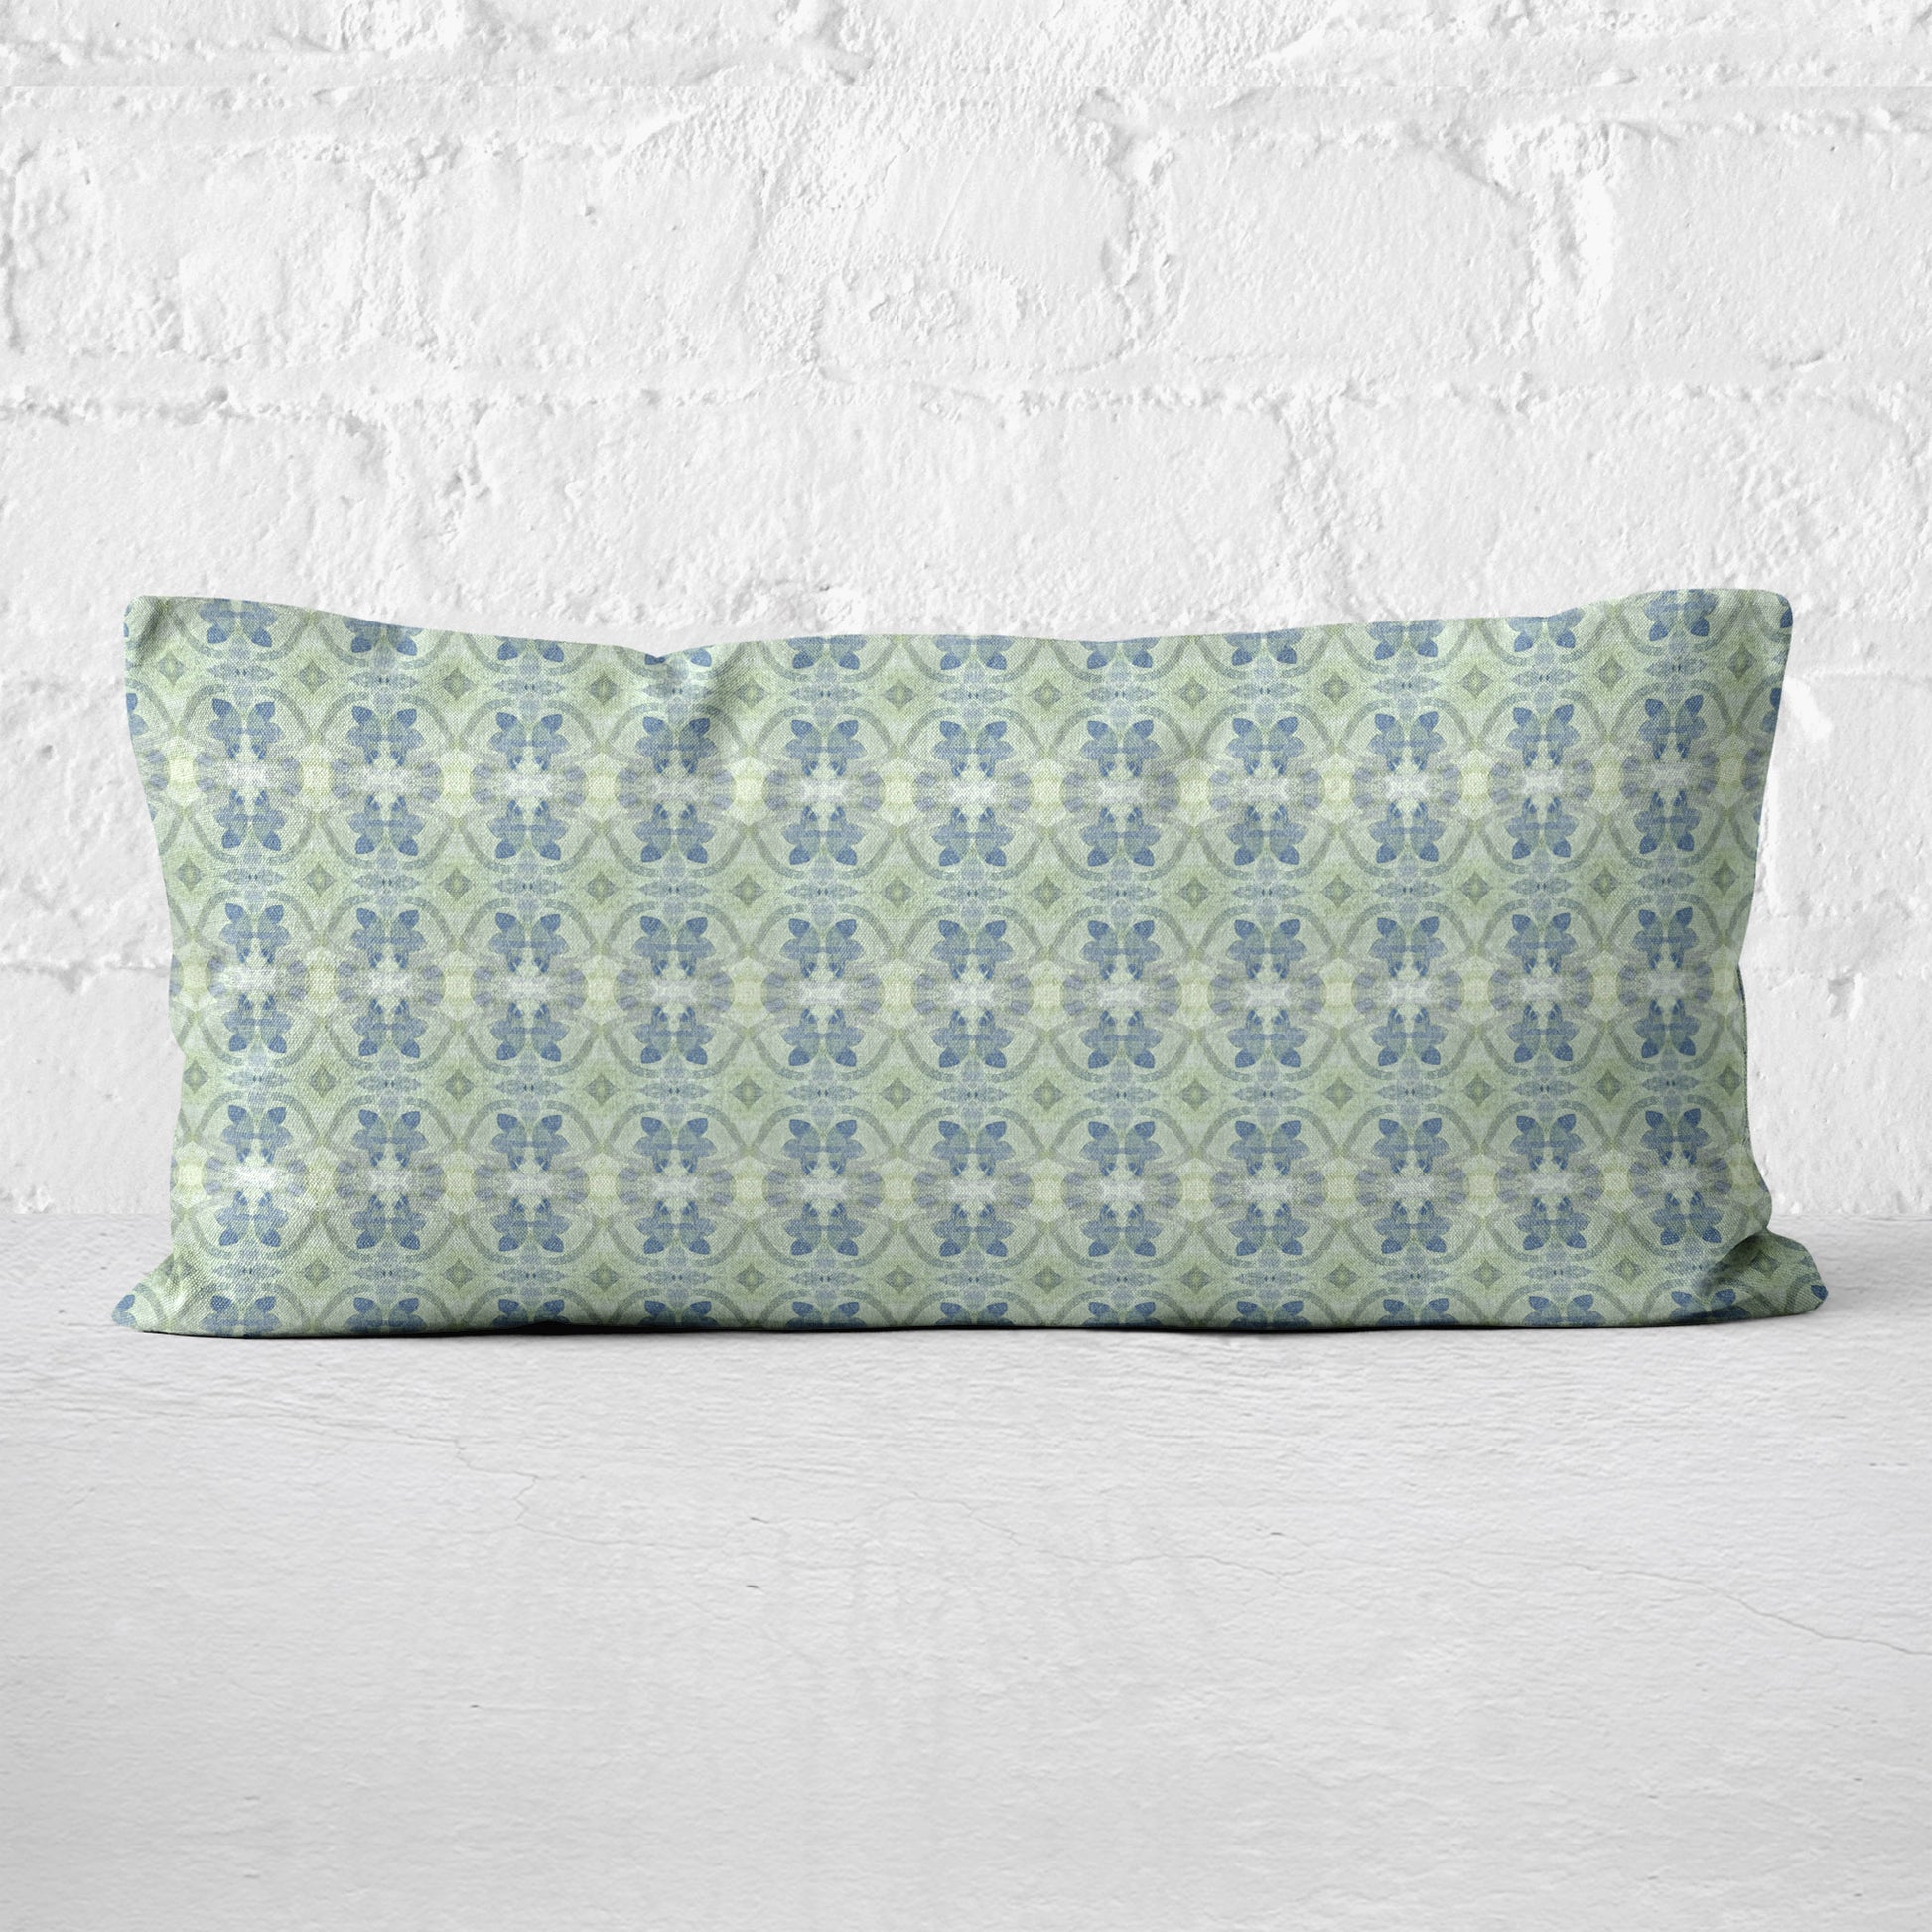 Lumbar pillow featuring a hand-painted green and blue abstract pattern